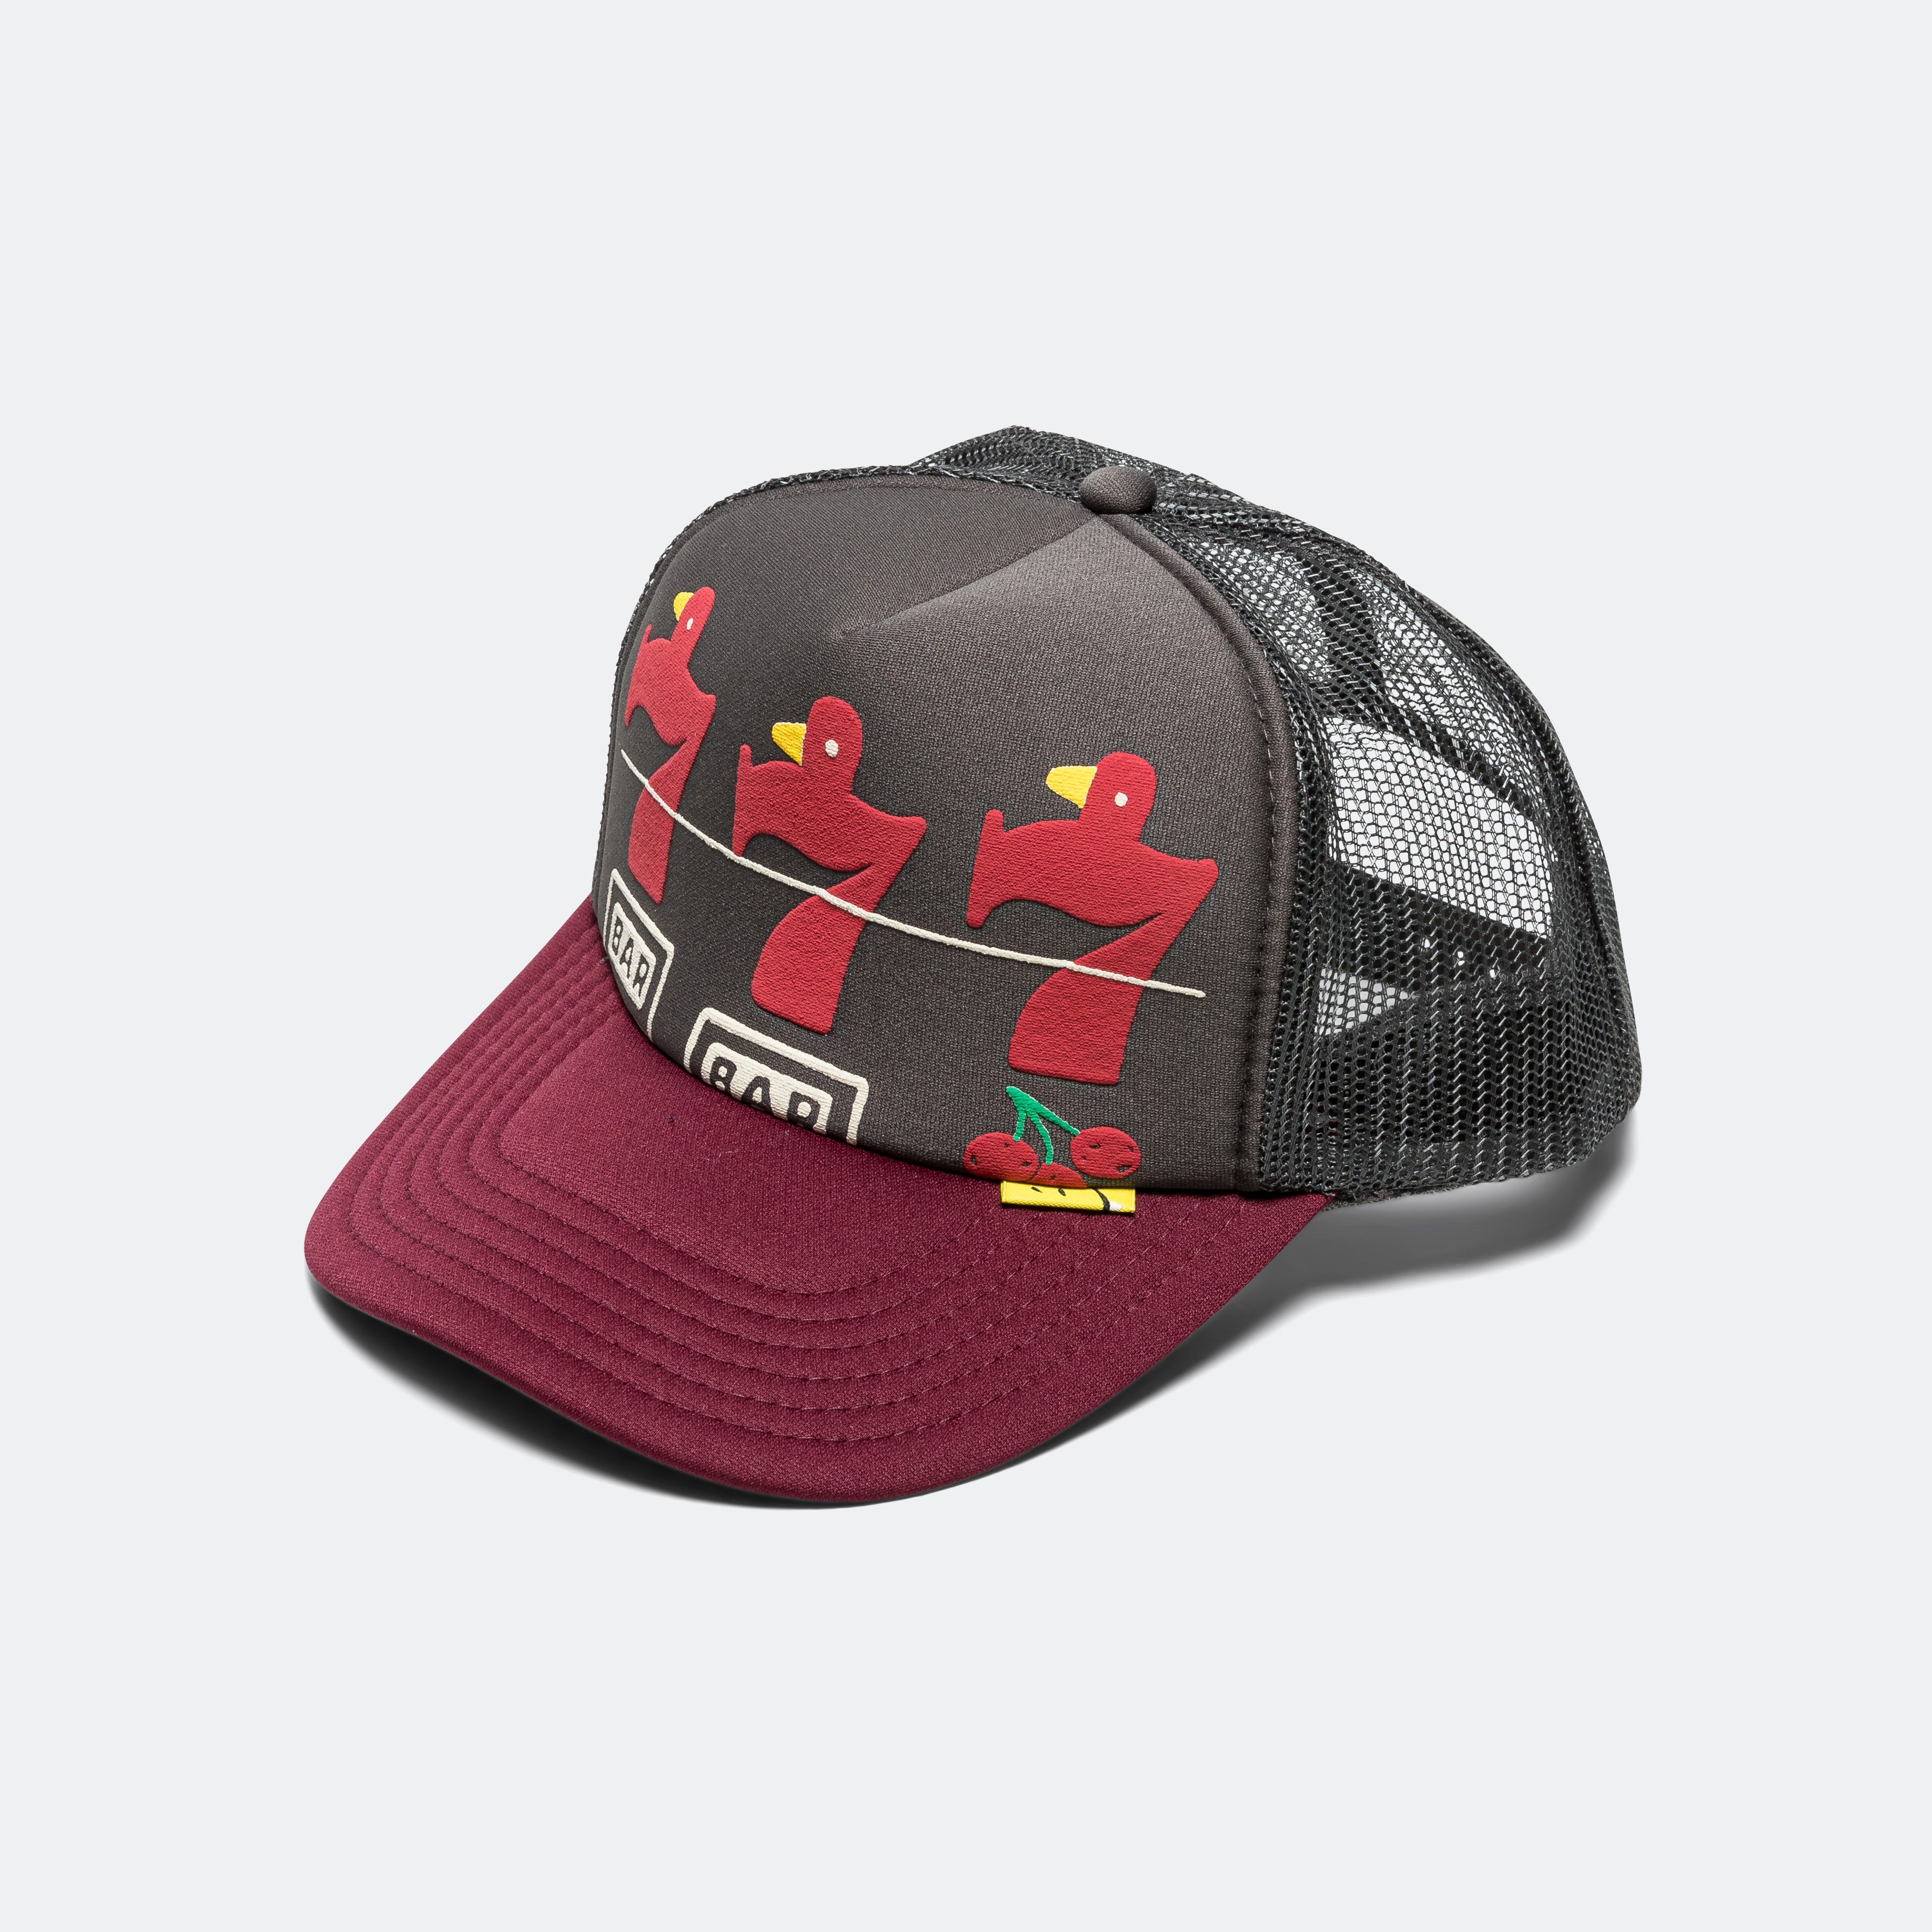 LUCKY BATTERY BIRD Truck Cap - Charcoal/Engine | UP THERE